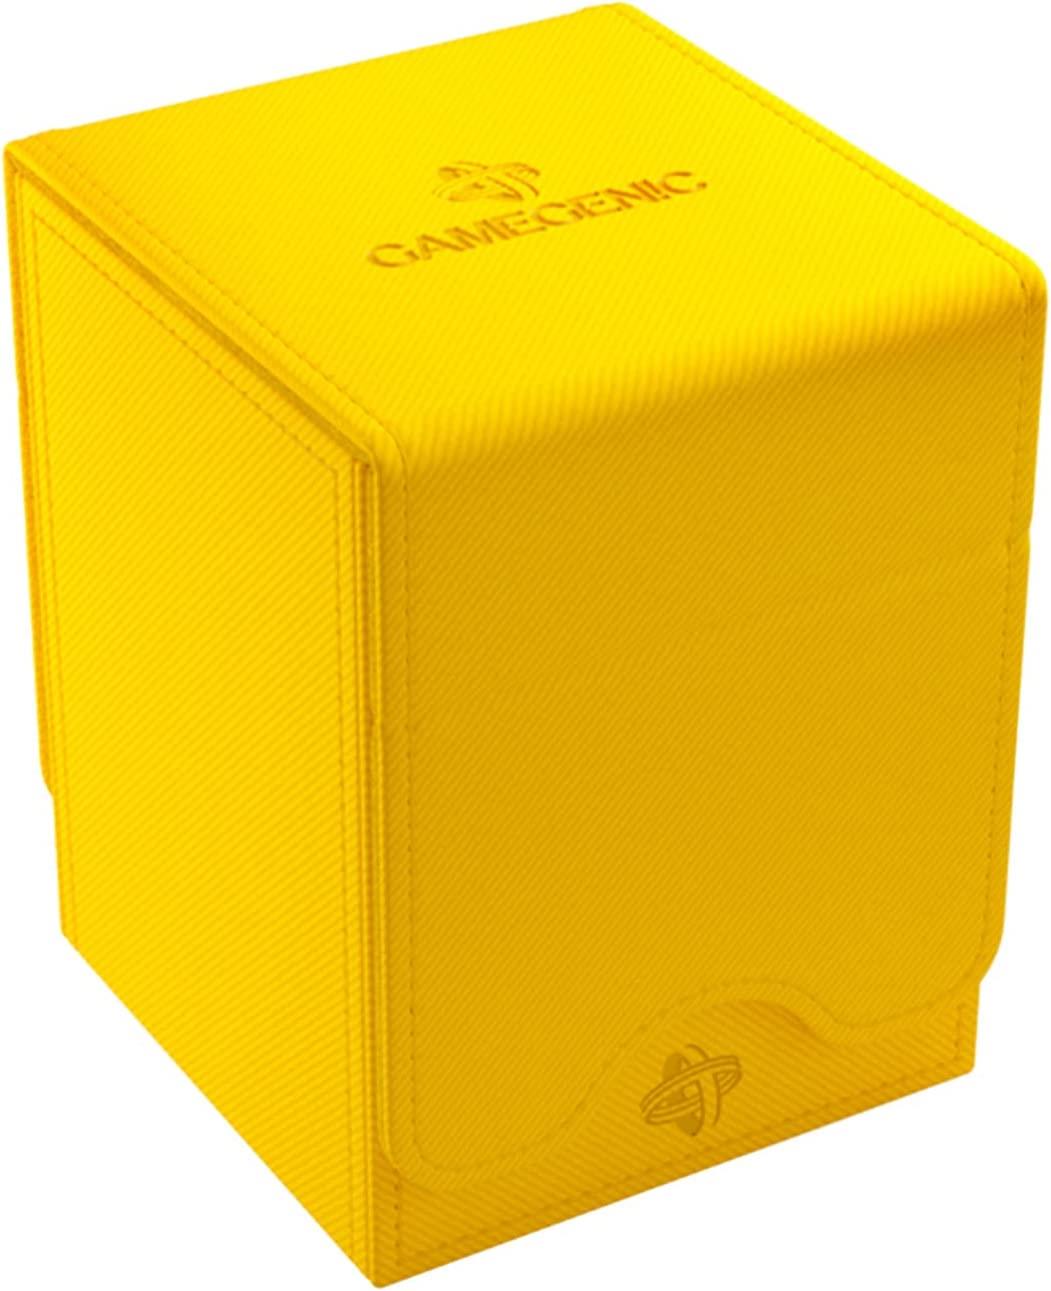 Squire 100+ XL - Yellow    TCG Gamegenic